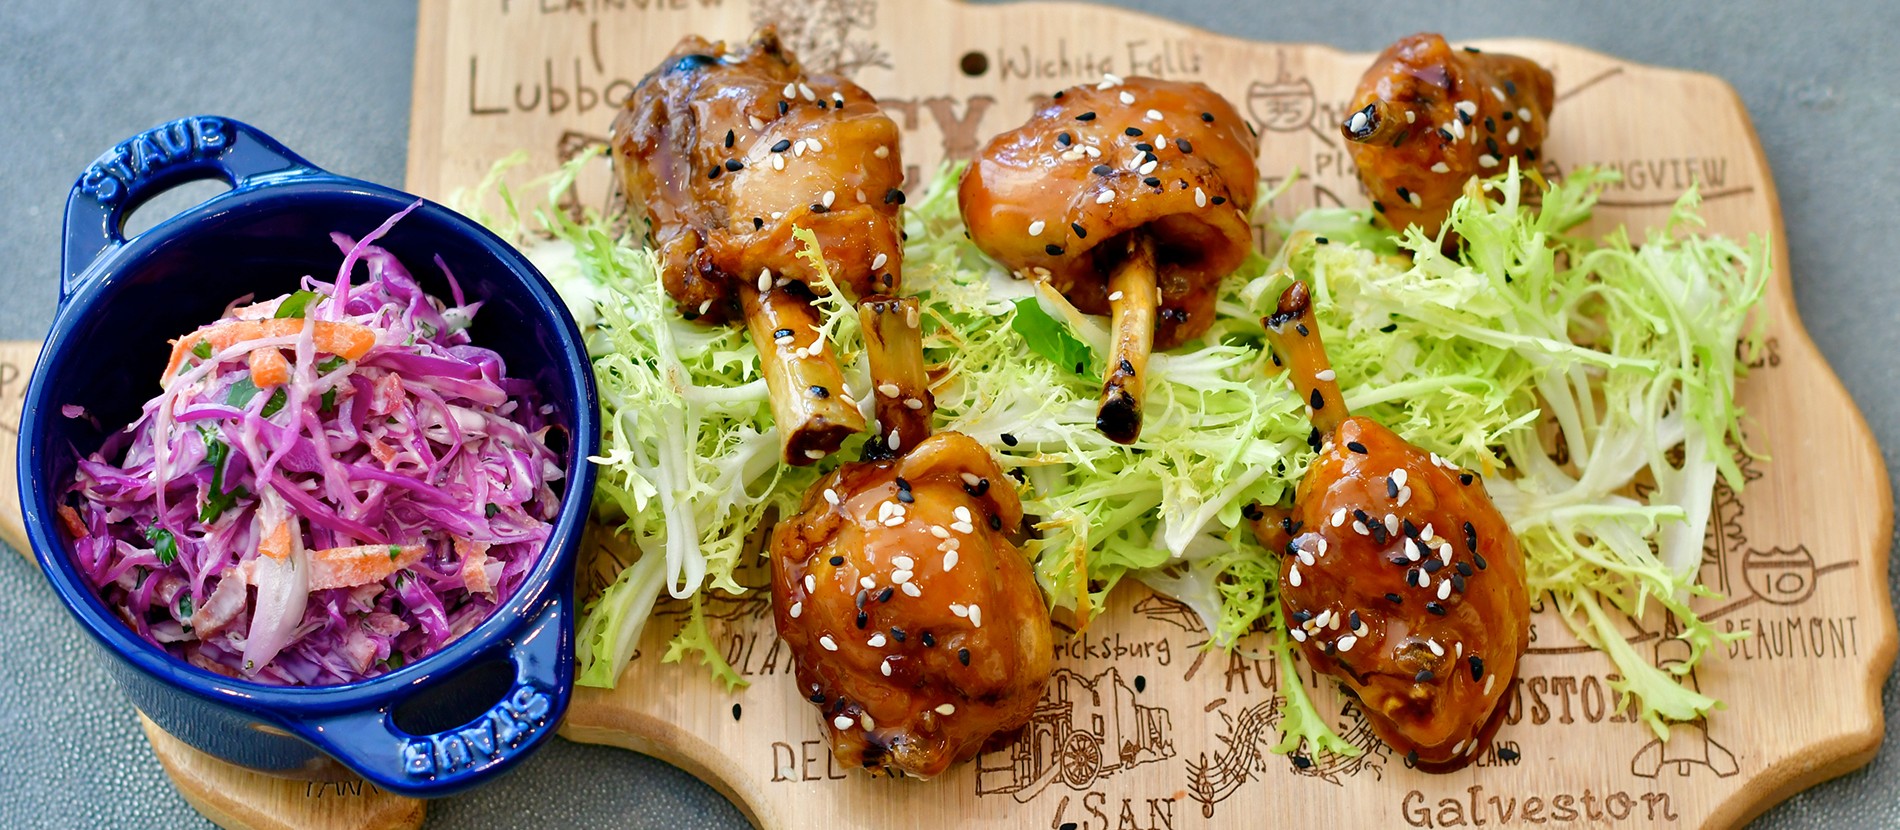 chicken lollipops on a bed of green lettuce and coleslaw side